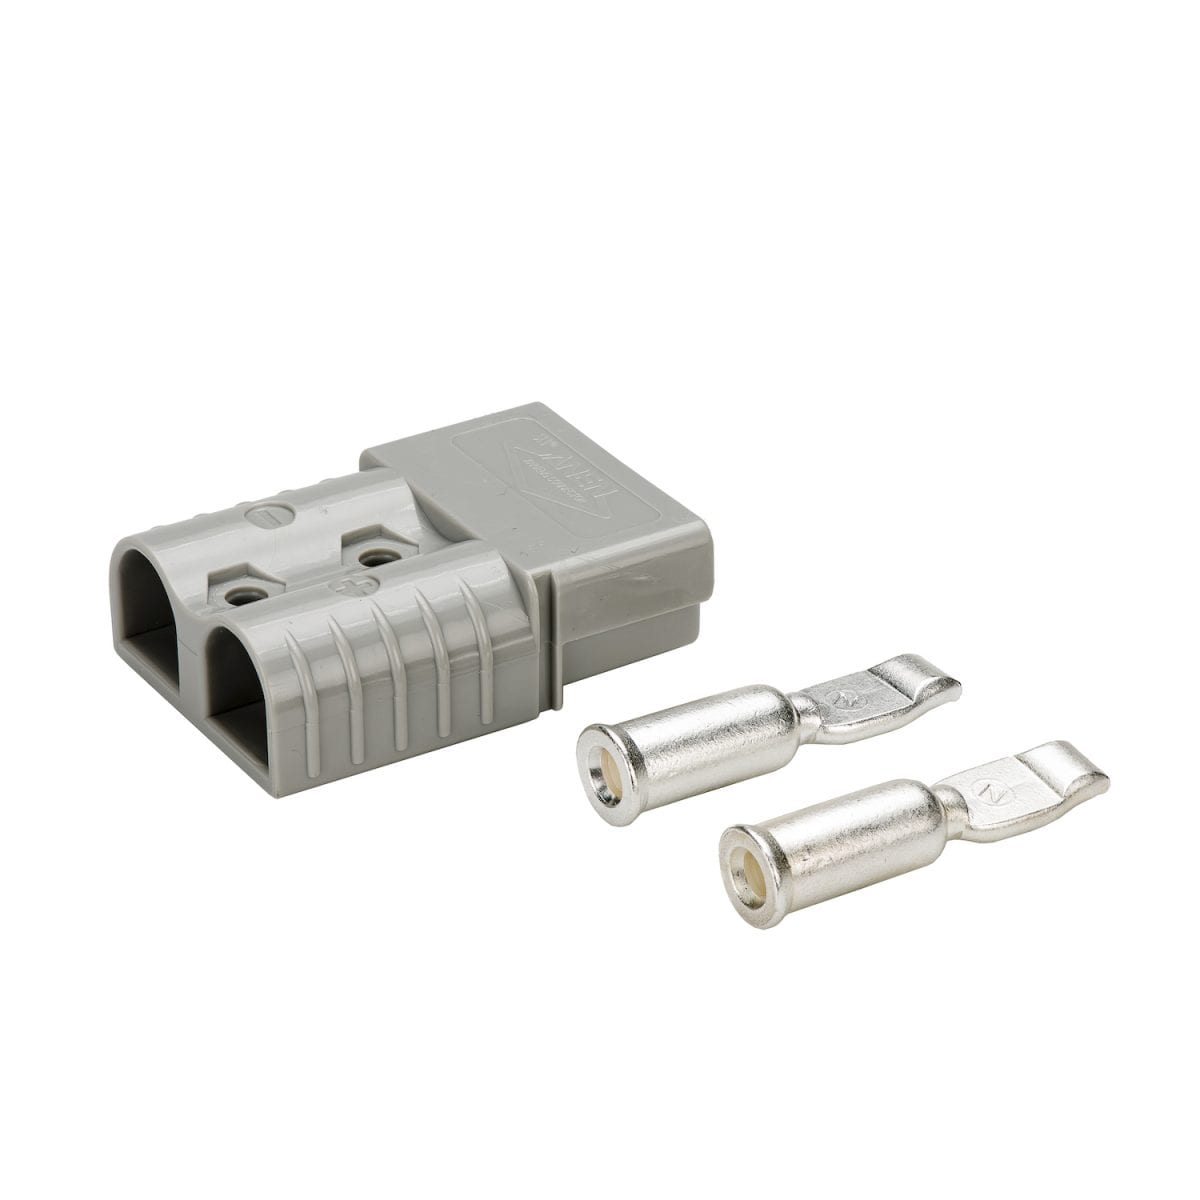 ANEN connector 120A product image